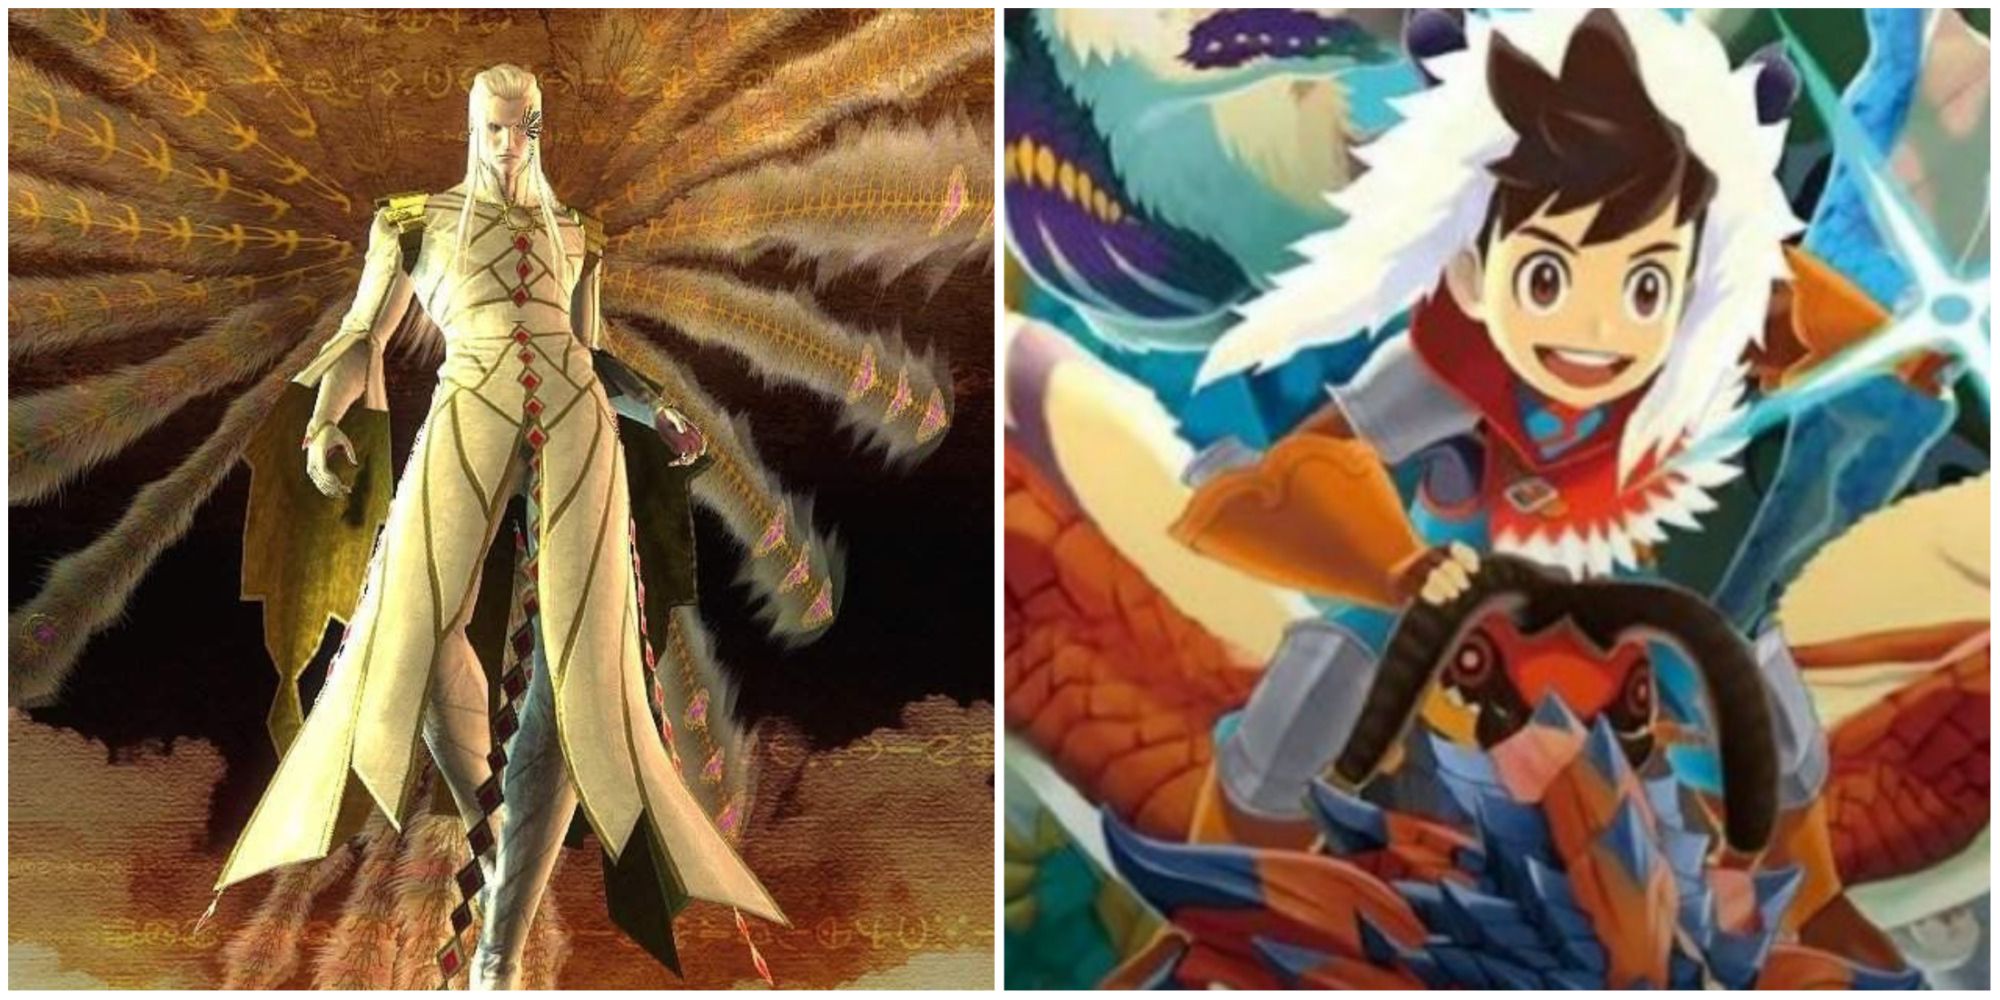 Balder with his wings outstretched and the rider from Monster Hunter stories